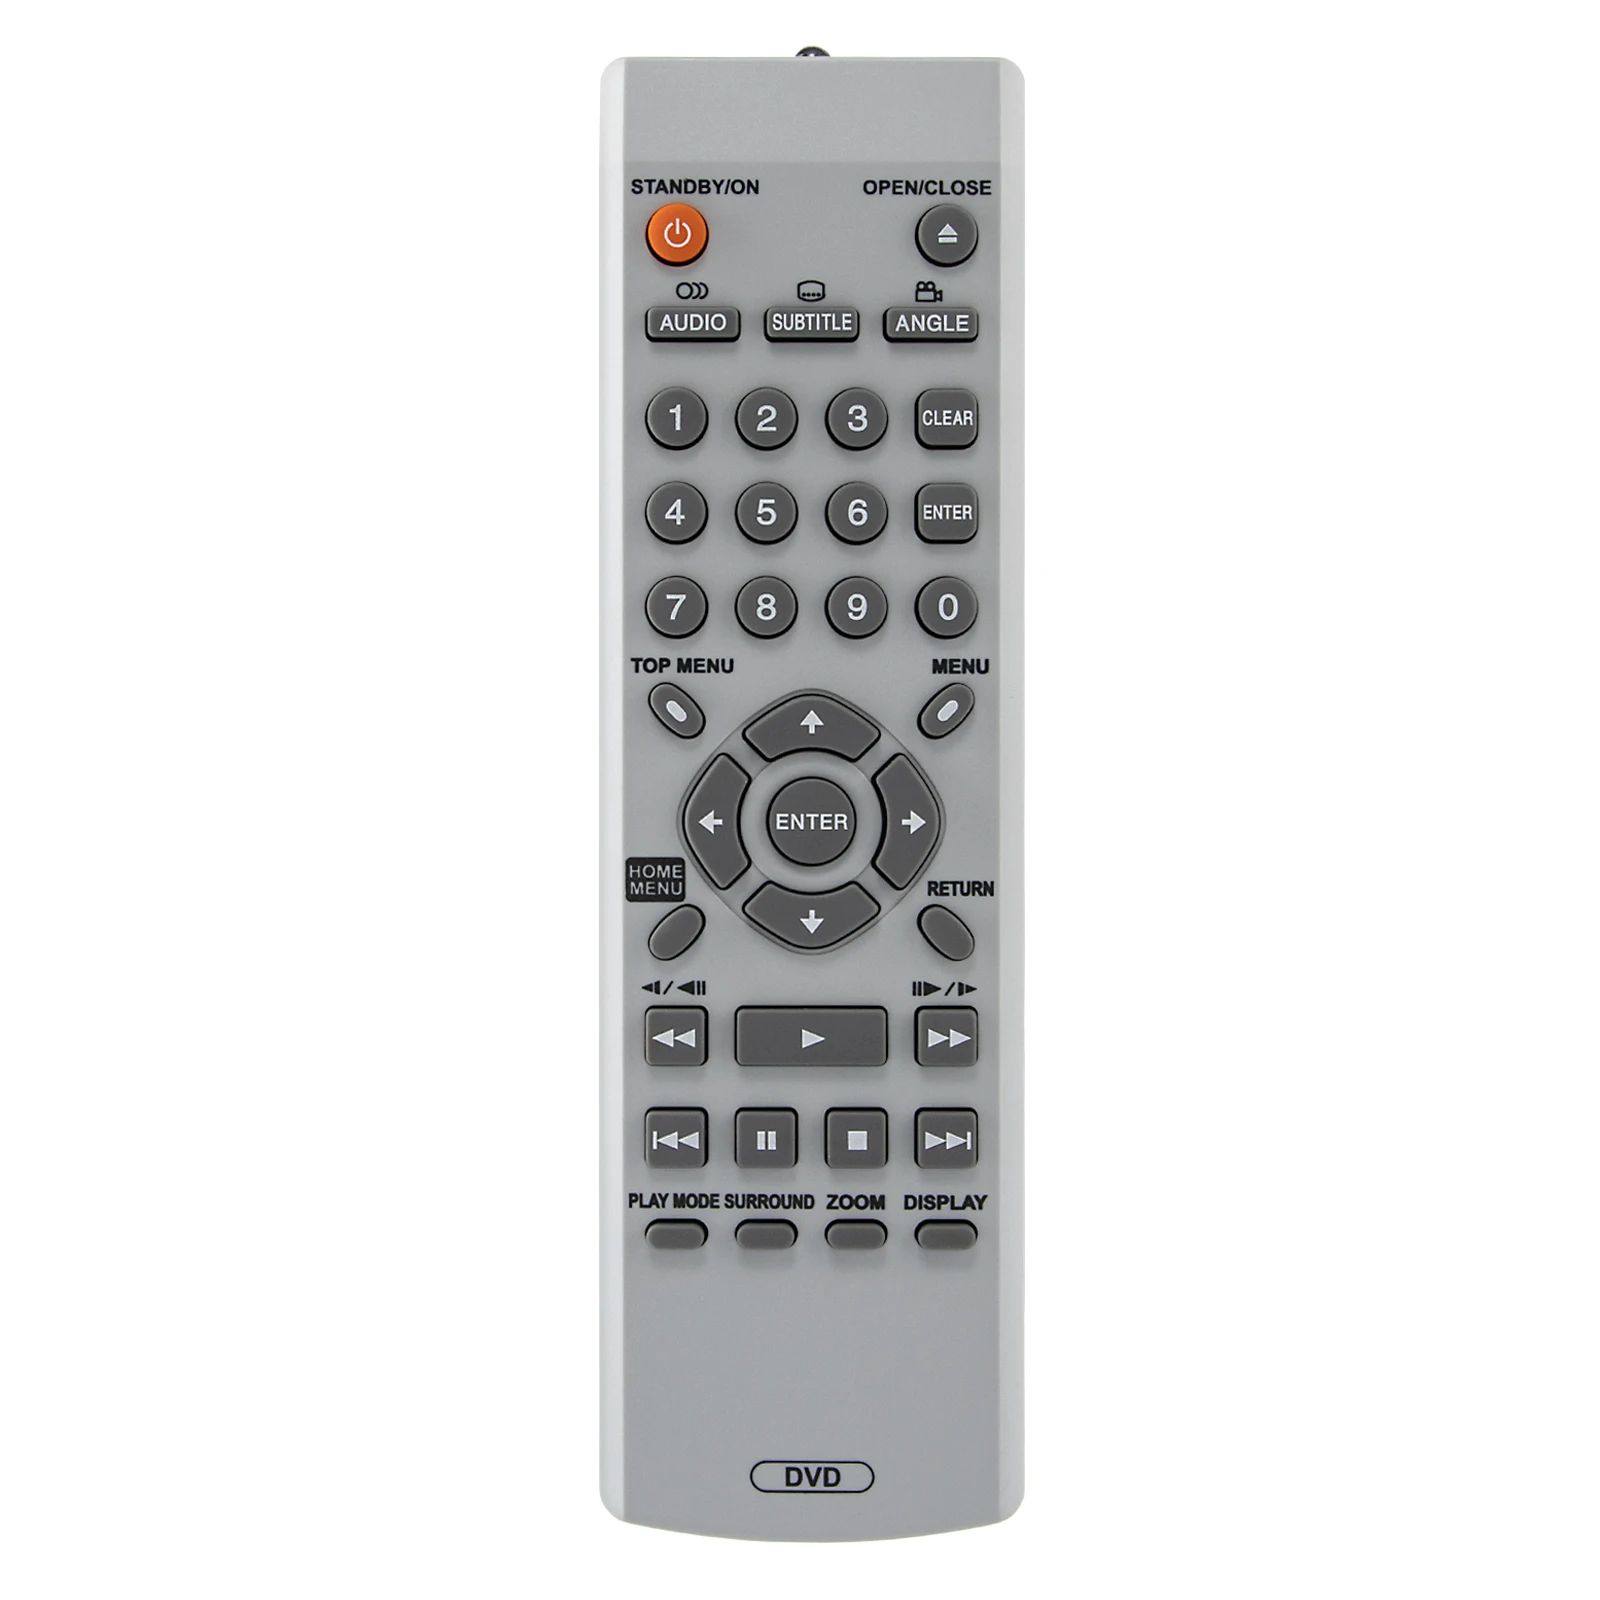 

New Remote Control for Pioneer Dvd Player VXX2918 VXX2800 VXX2913 VXX2865 VXX2914 VXX2808 2700 DV5700KG/RAXCN DV575KS/RLXJ